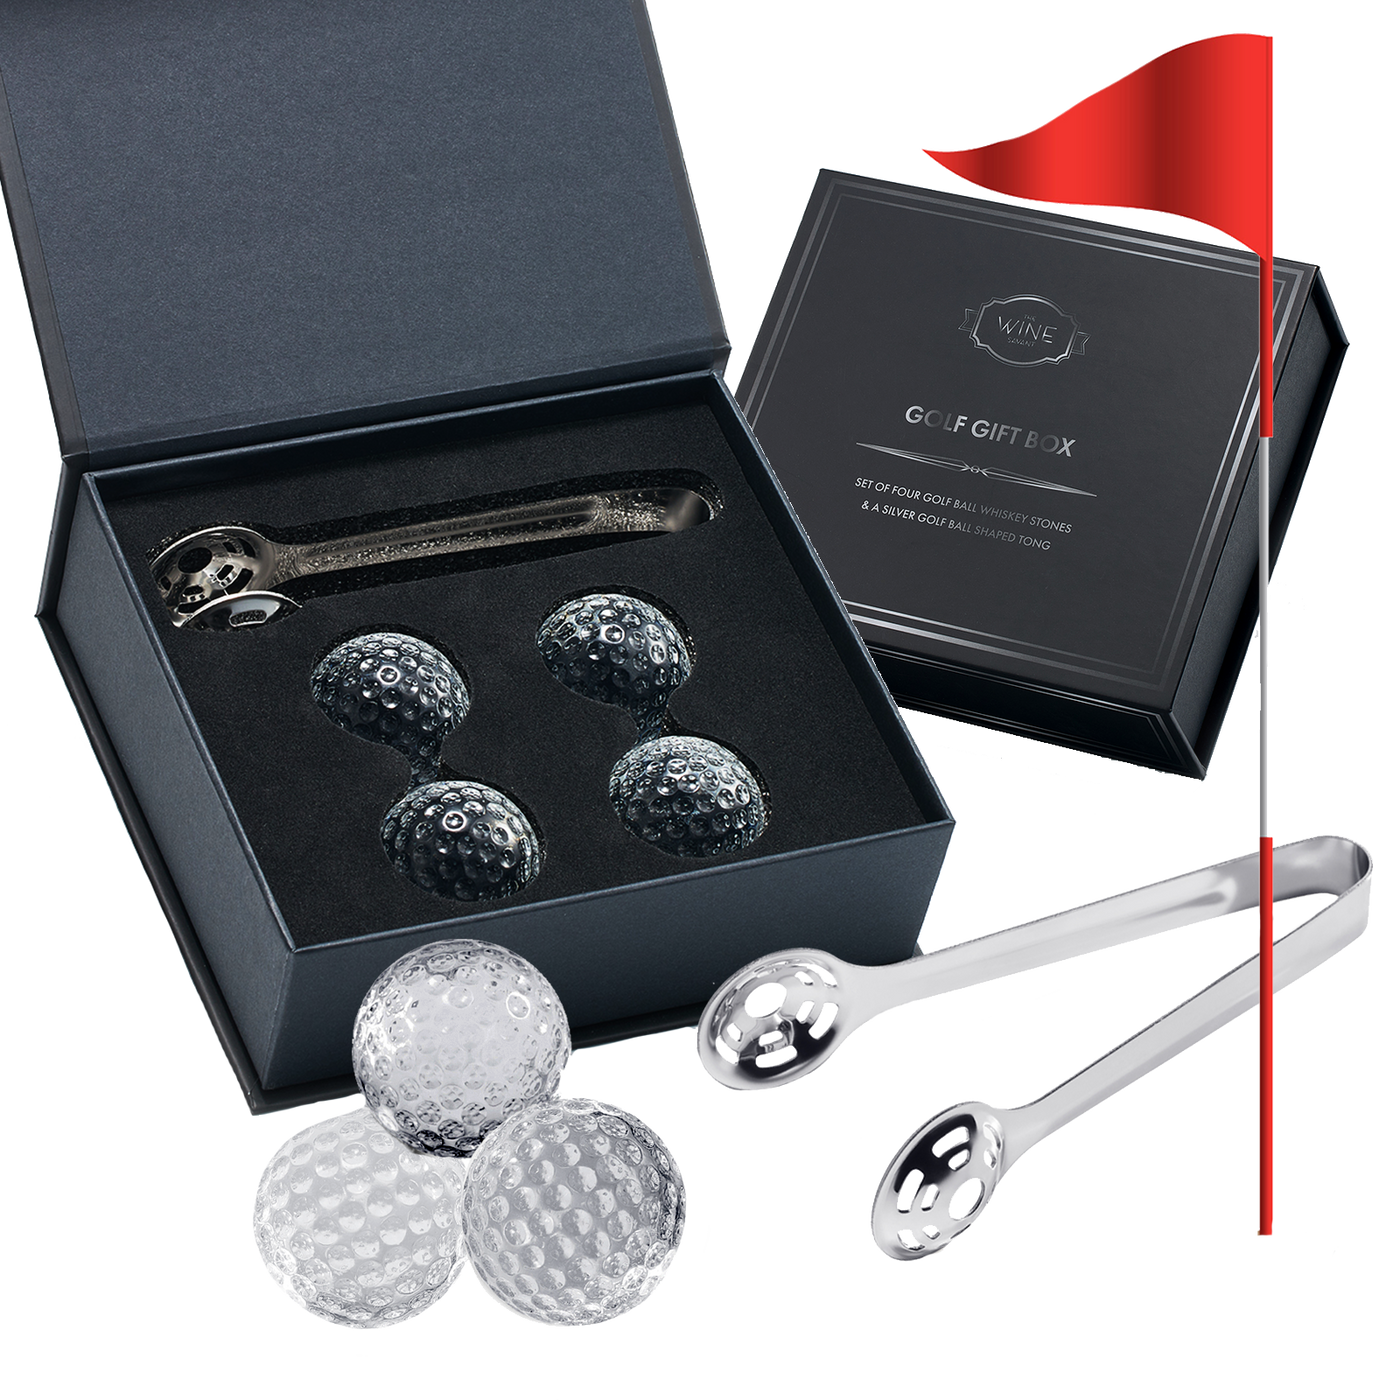 Golf Ball Whiskey Coolers - Pack of 5 - Men's Gift Set; Golfer's Whiskey Chill Stones, Reusable Cooling Balls; Includes 4 Chilling Stones - Ideal Golf-Themed Gift for Men + Metallic Tongs & Gift Box